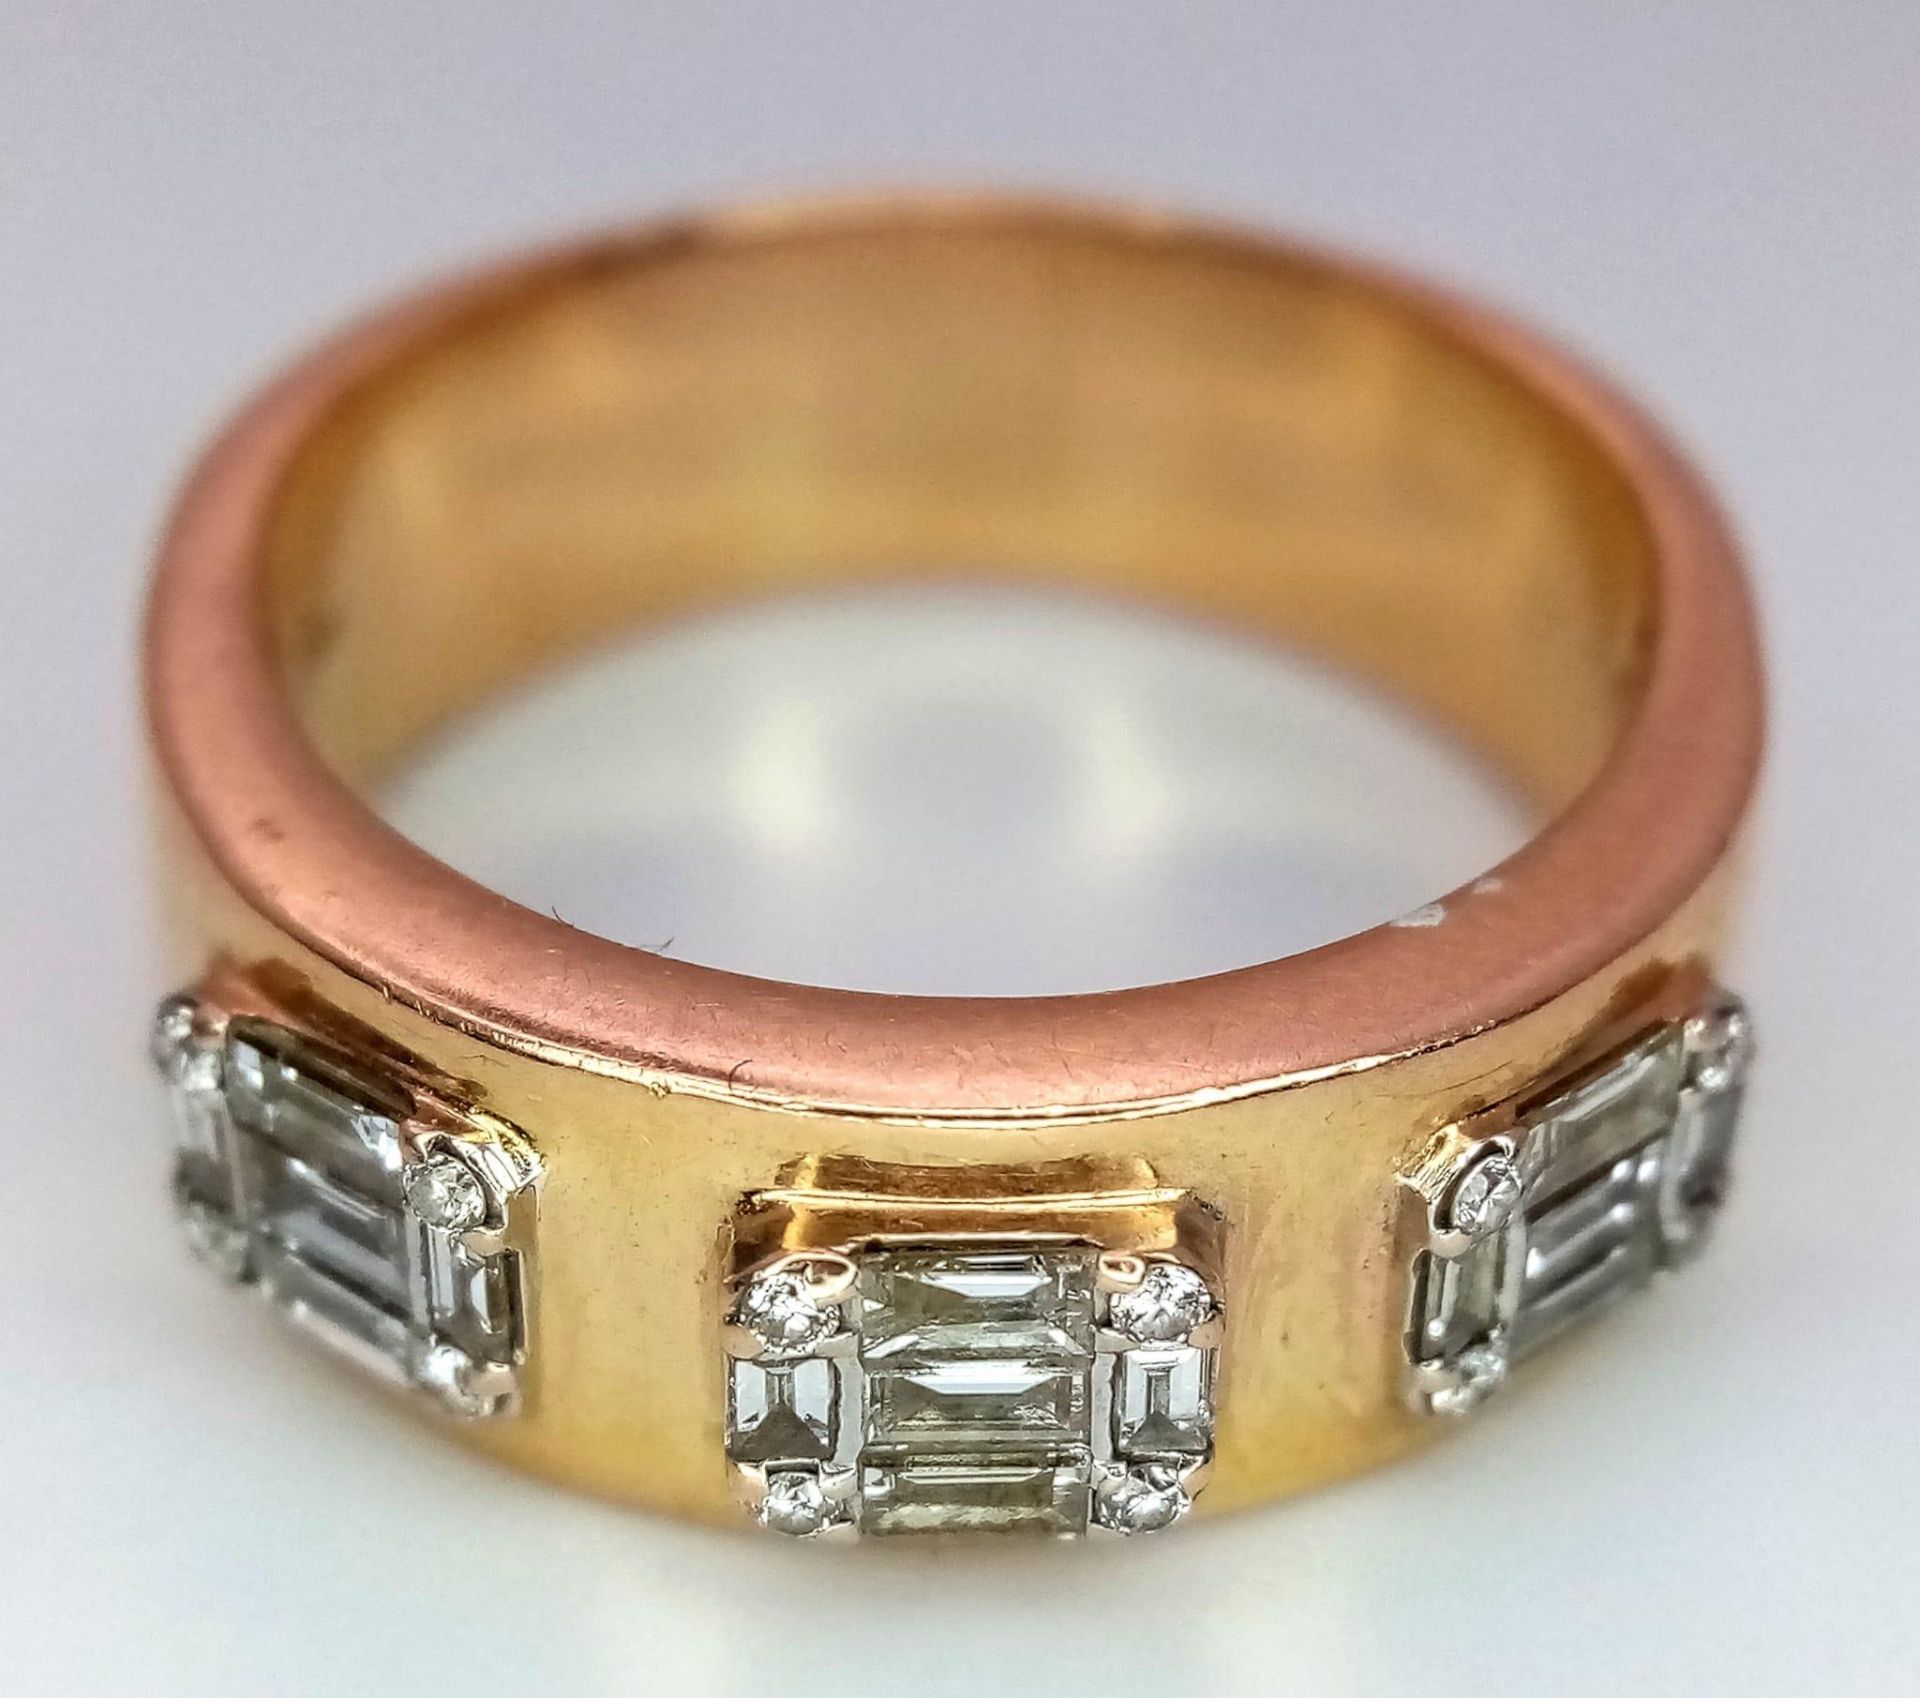 An 18K Rose Gold Diamond Gents Ring. Three sections of baguette and round cut diamonds symbolizing